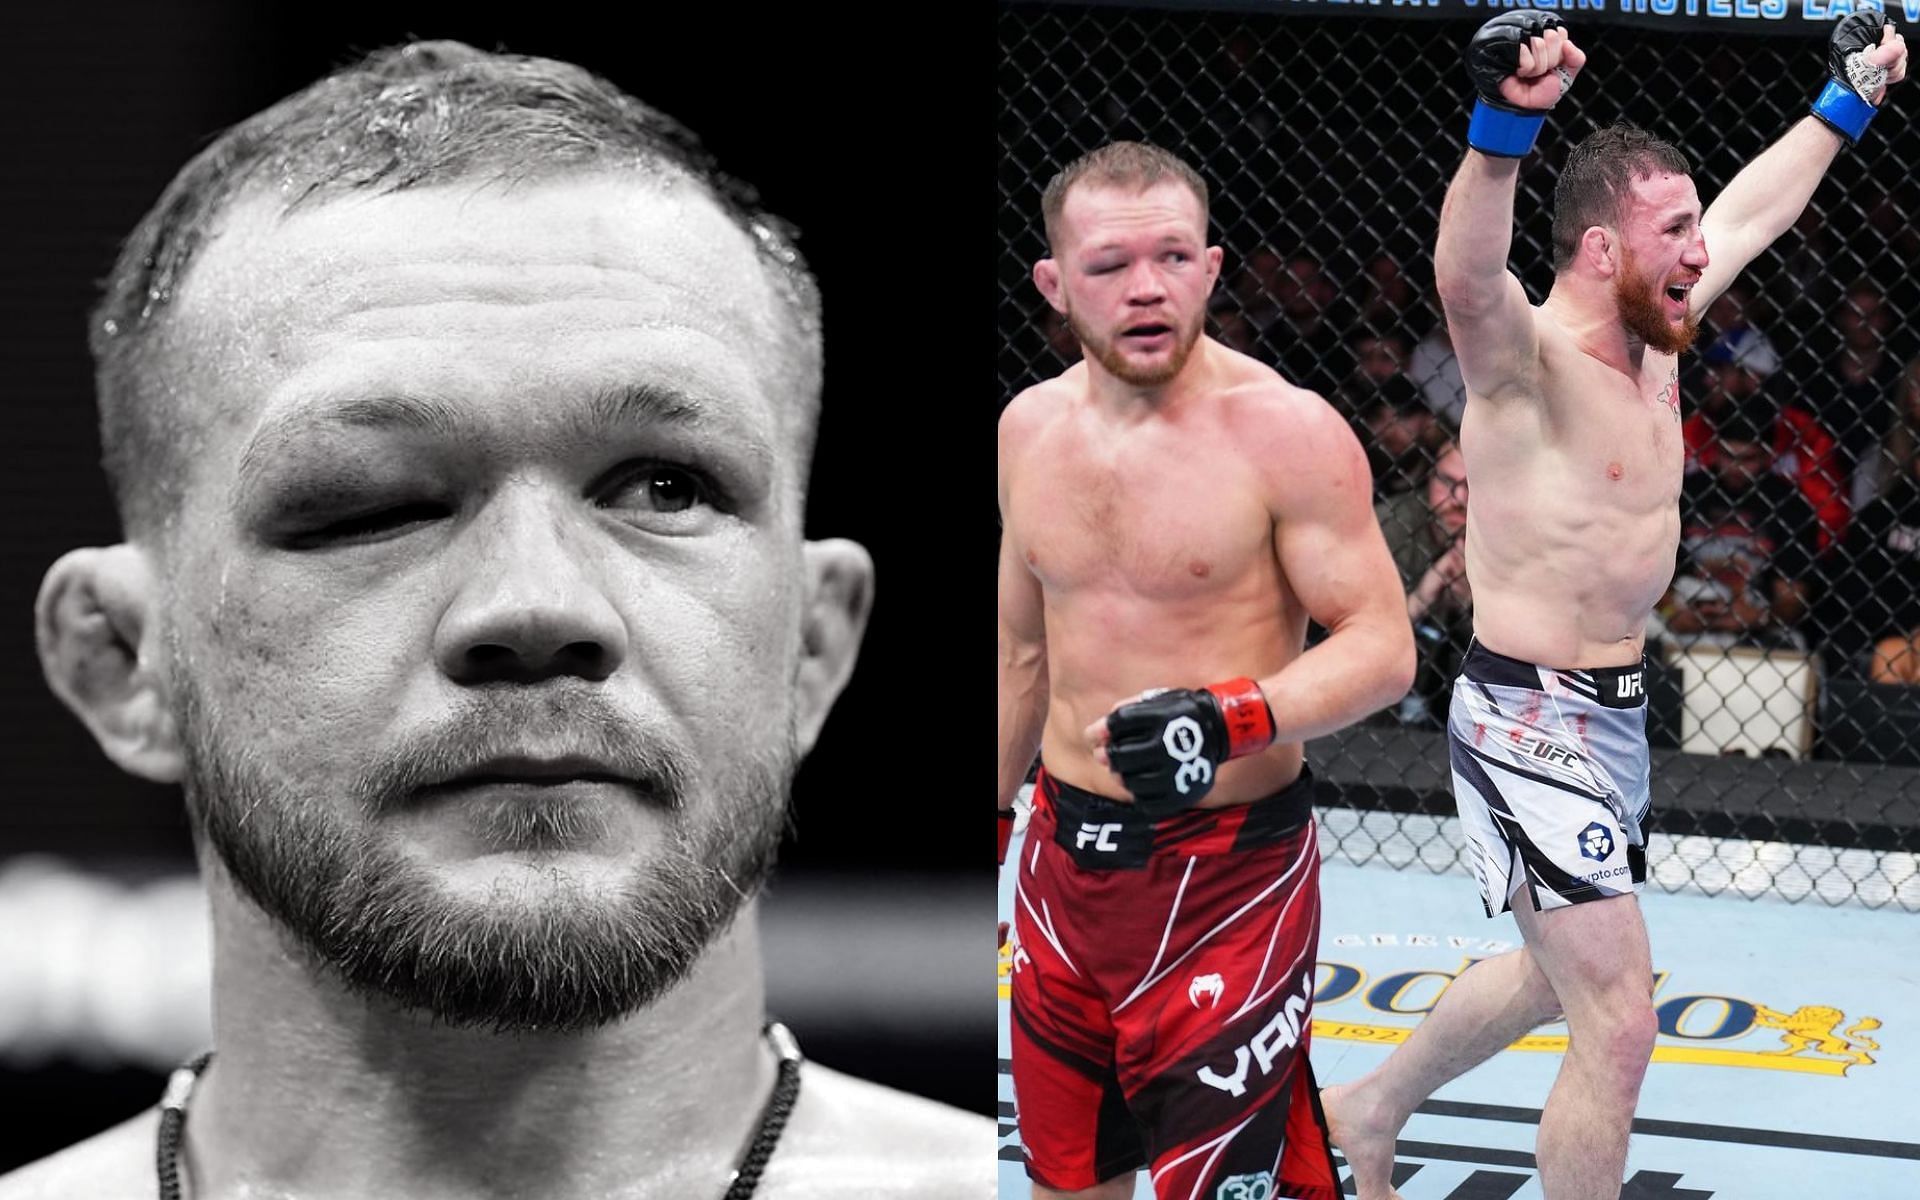 Petr Yan reveals he was not 100% fit going into Merab Dvalishvili fight [Images via: @ufc and @ufc_brasil on Instagram]